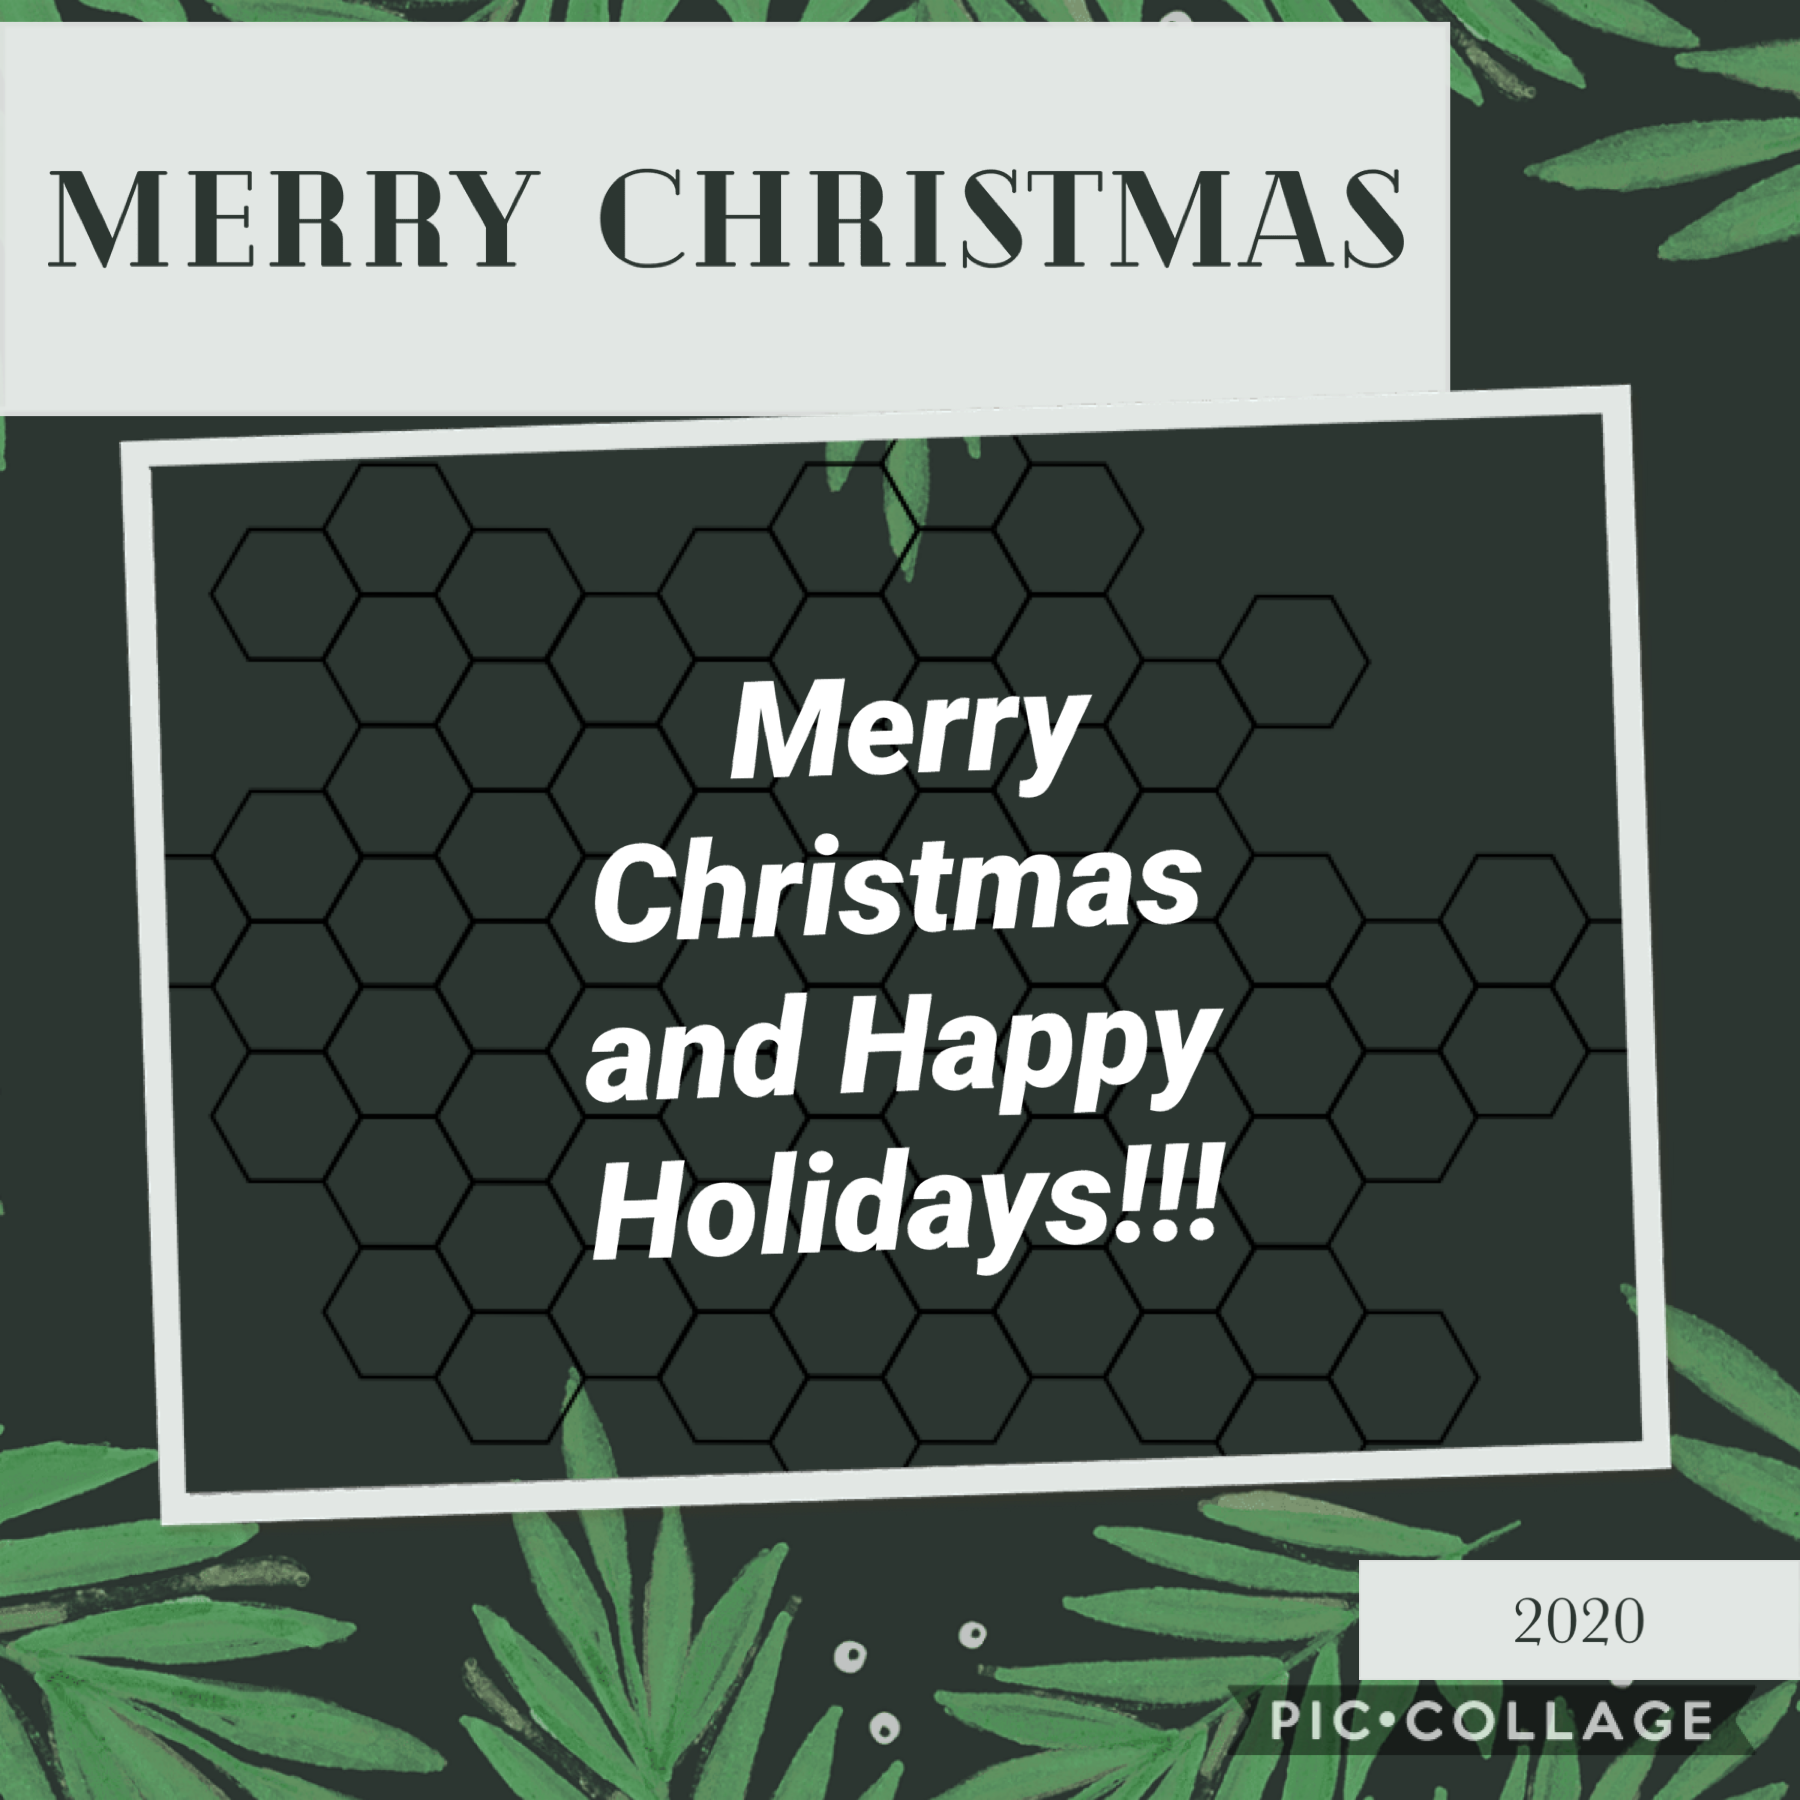 Merry Christmas y’all!!!